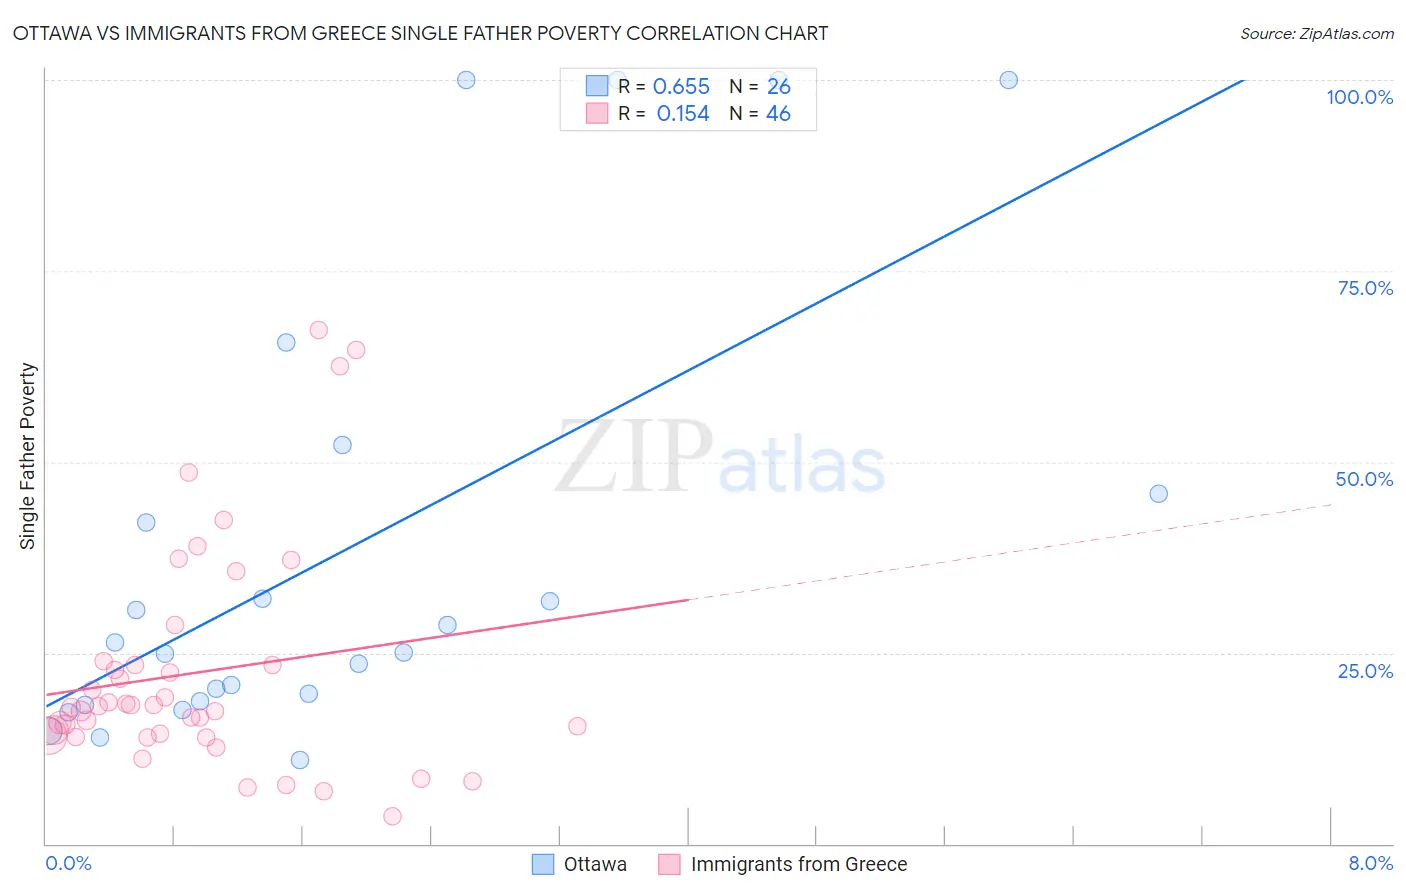 Ottawa vs Immigrants from Greece Single Father Poverty